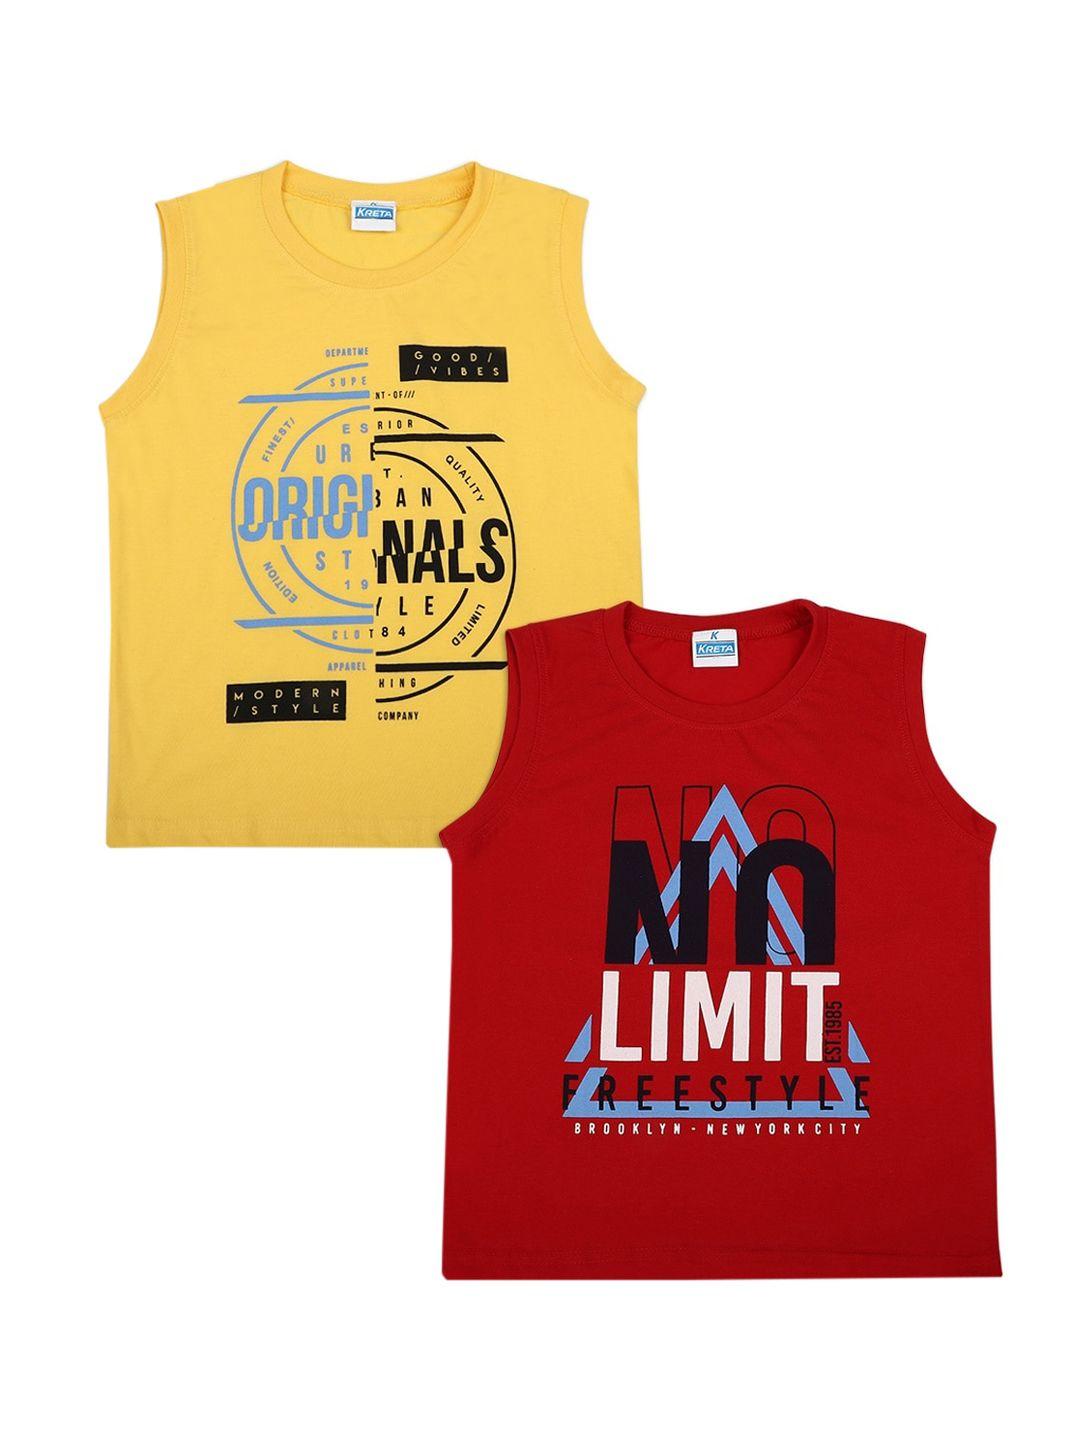 v-mart boys pack of 2 yellow & red printed tanks